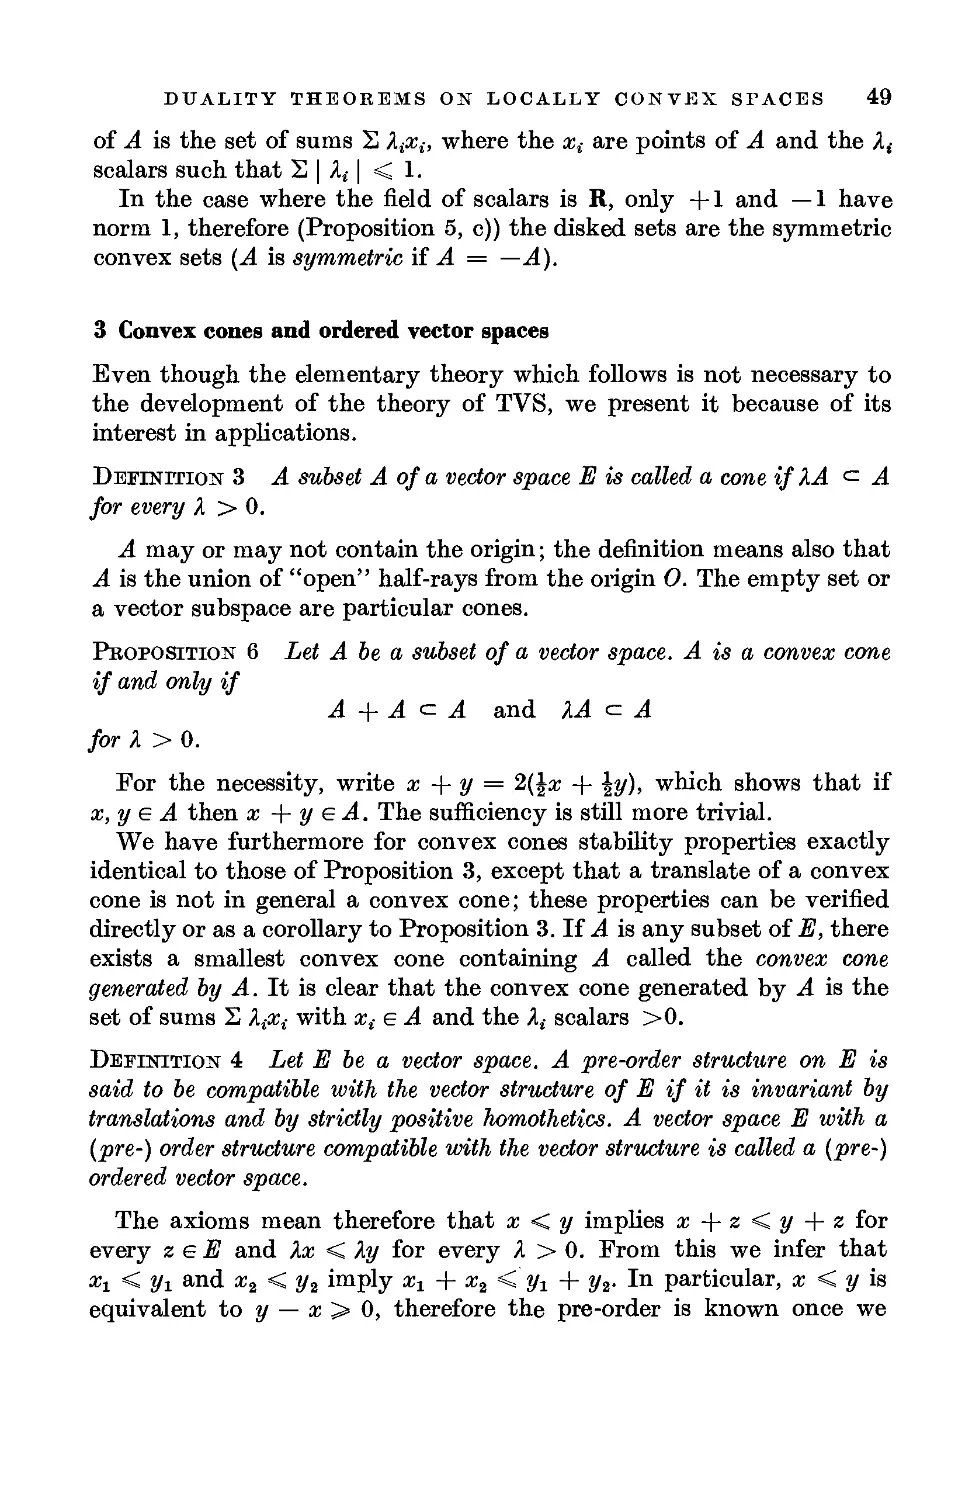 3. Convex cones and ordered vector spaces